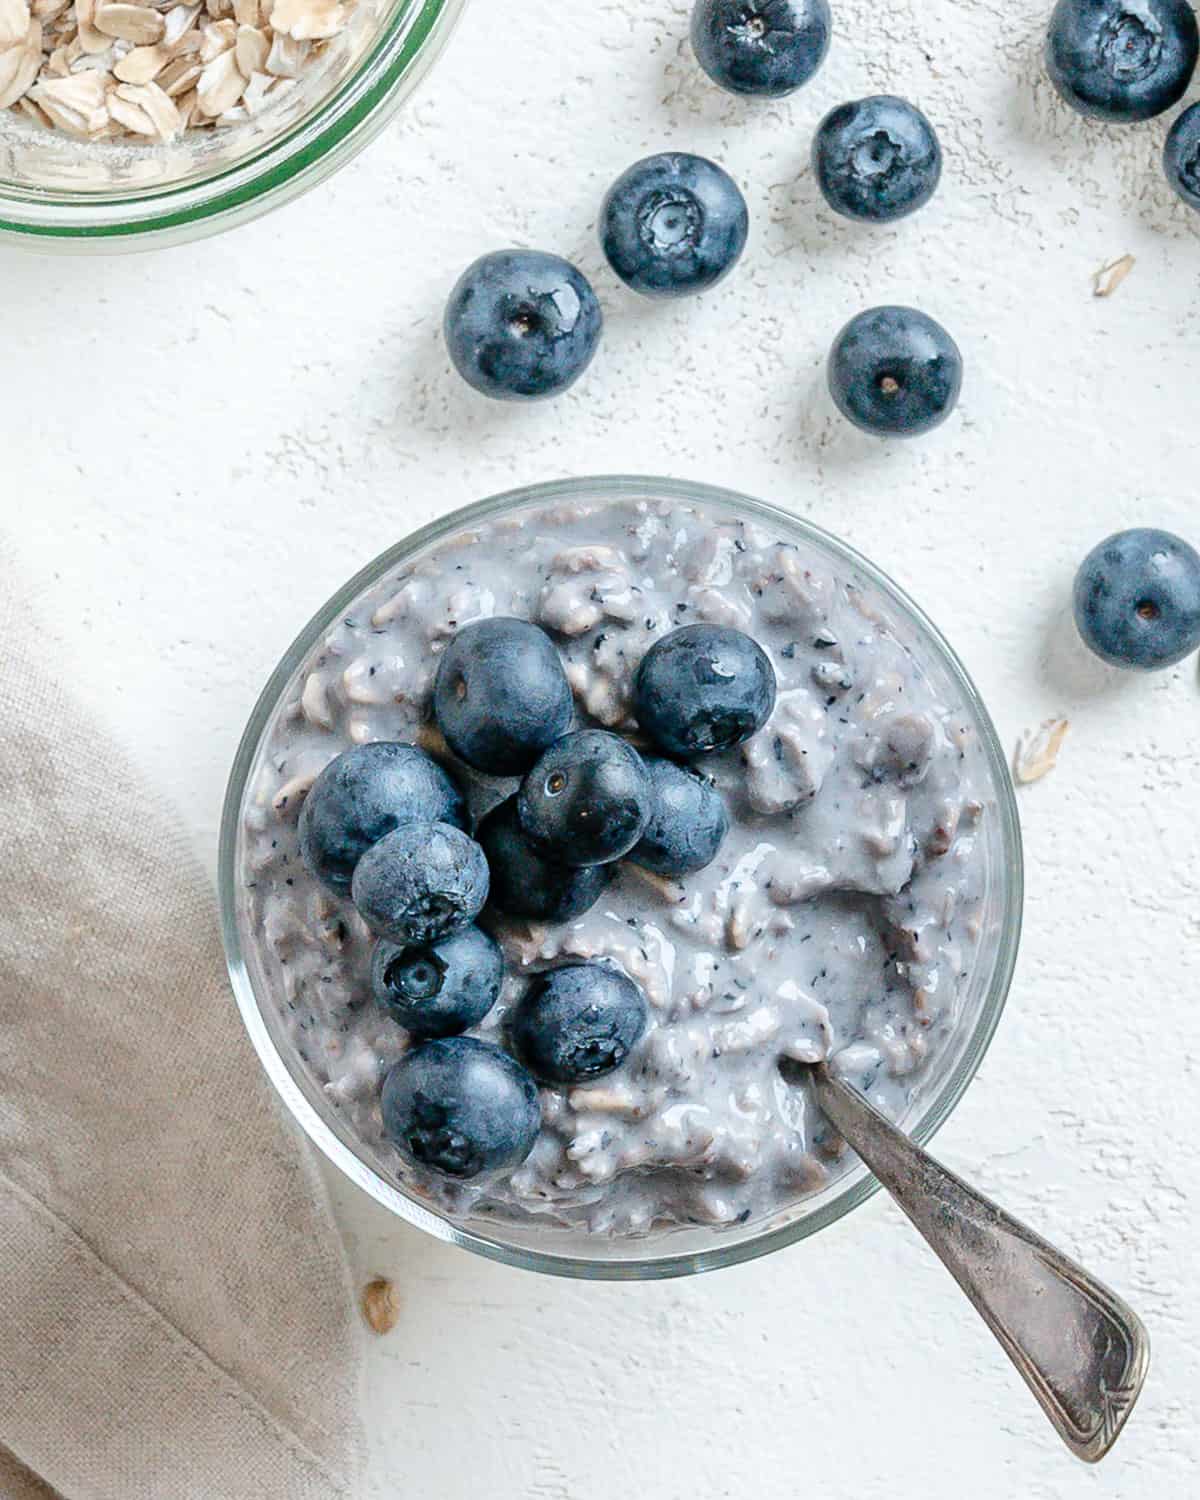 completed Blueberry Overnight Oats against a light background with blueberries scattered